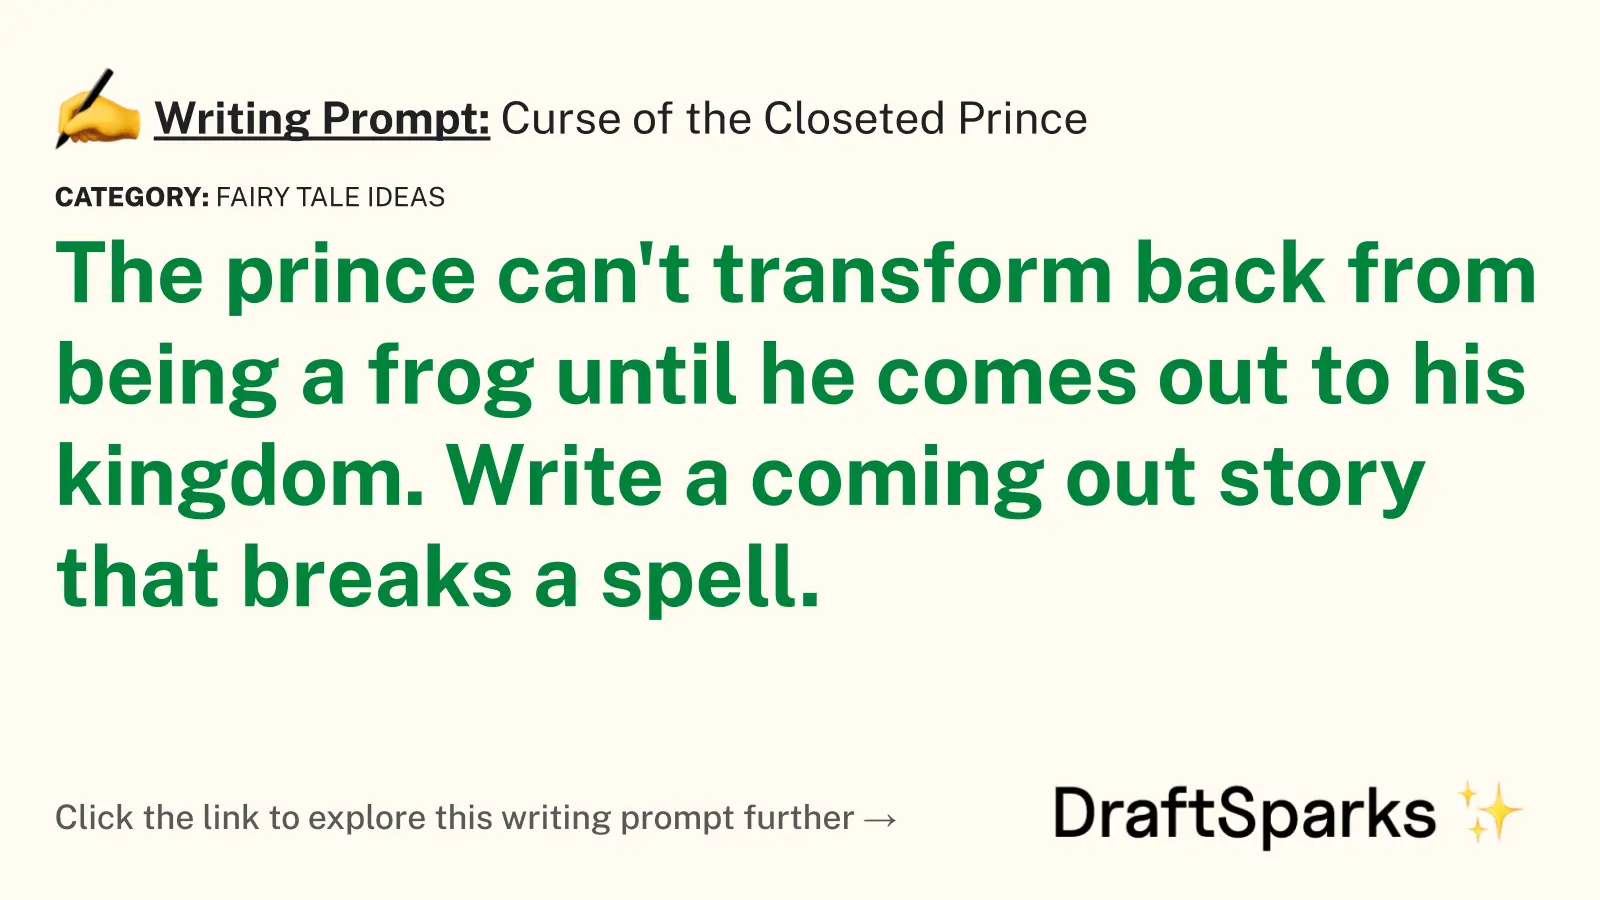 Curse of the Closeted Prince